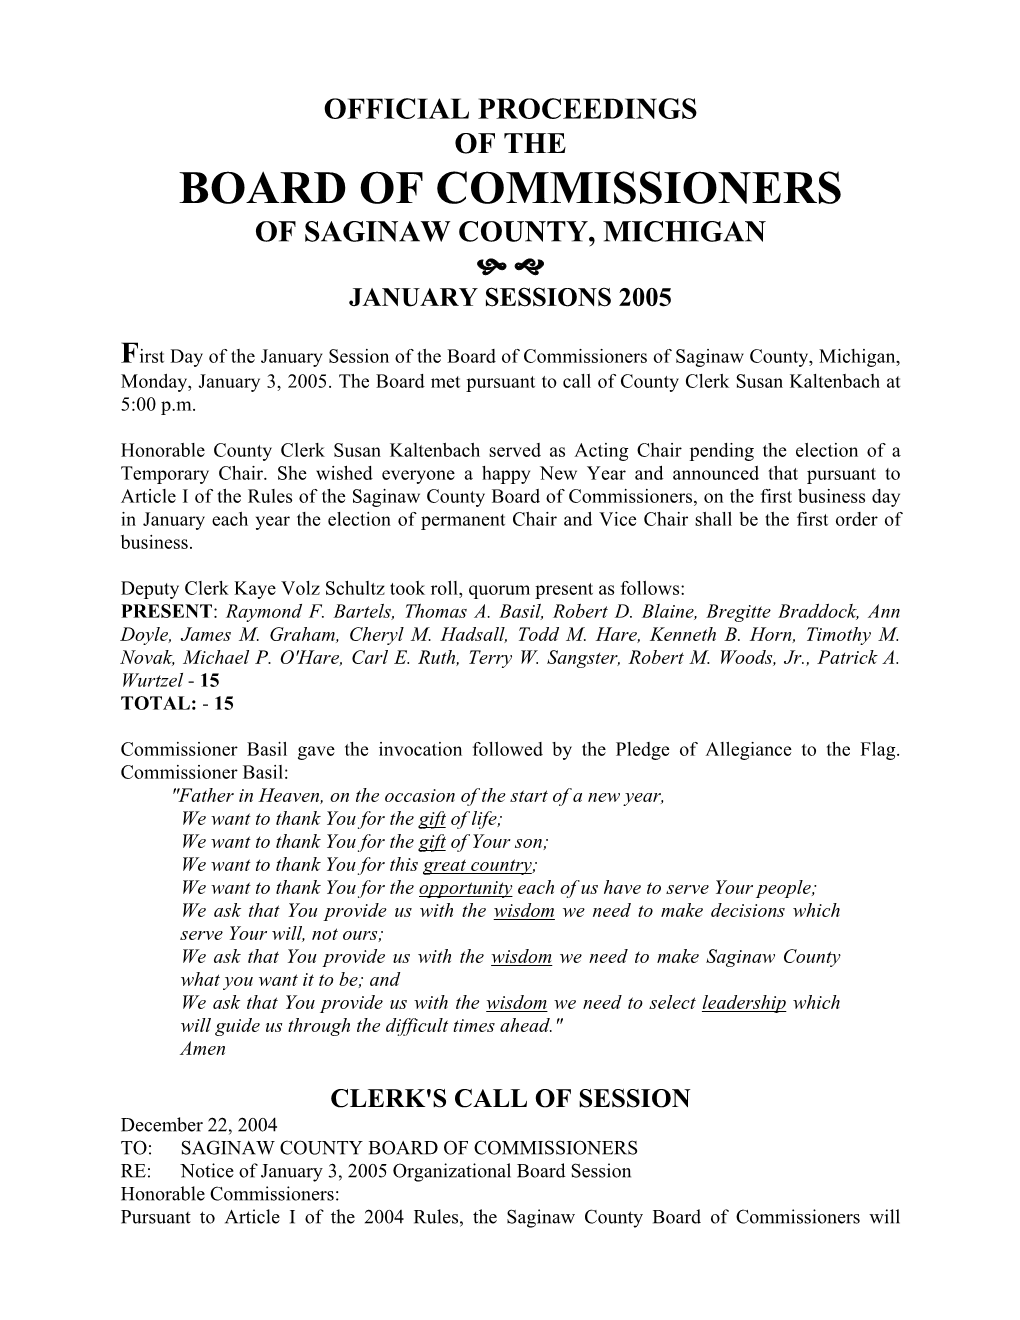 Official Proceedings of the Board of Commissioners of Saginaw County, Michigan ^ ] January Sessions 2005